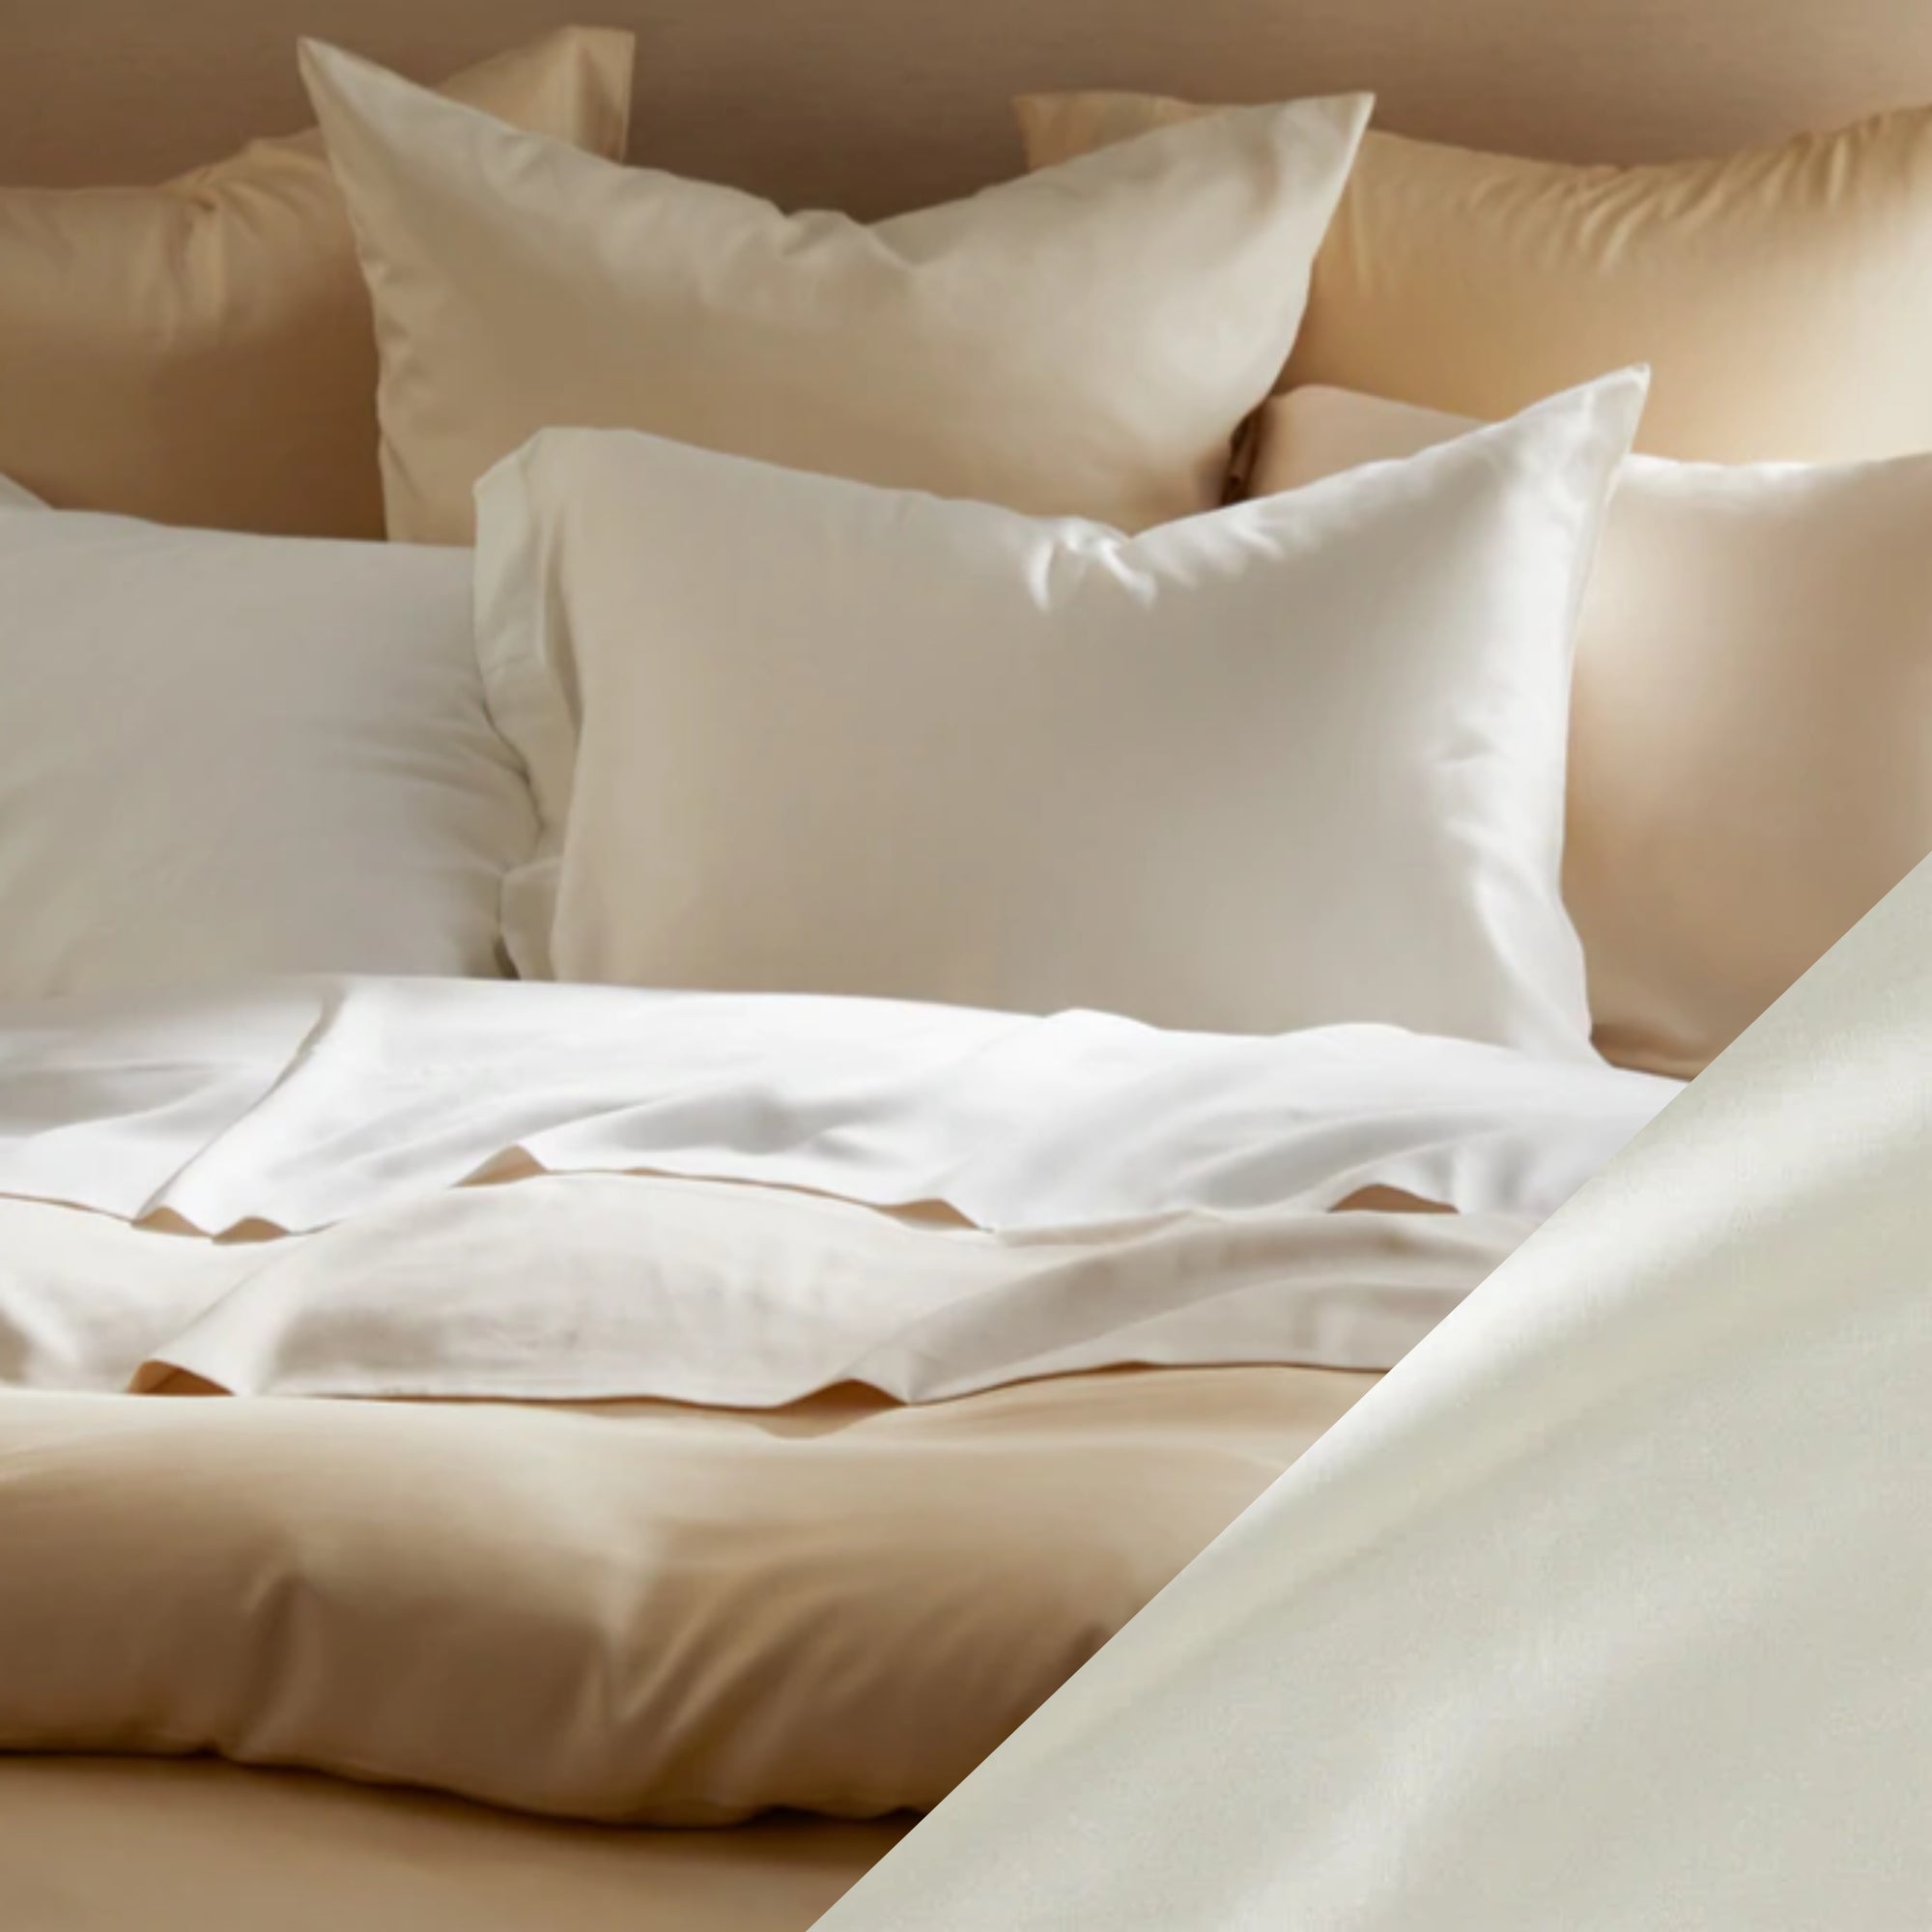 Main Lifestyle of SDH Legna Classic Bedding with Swatch of Sand